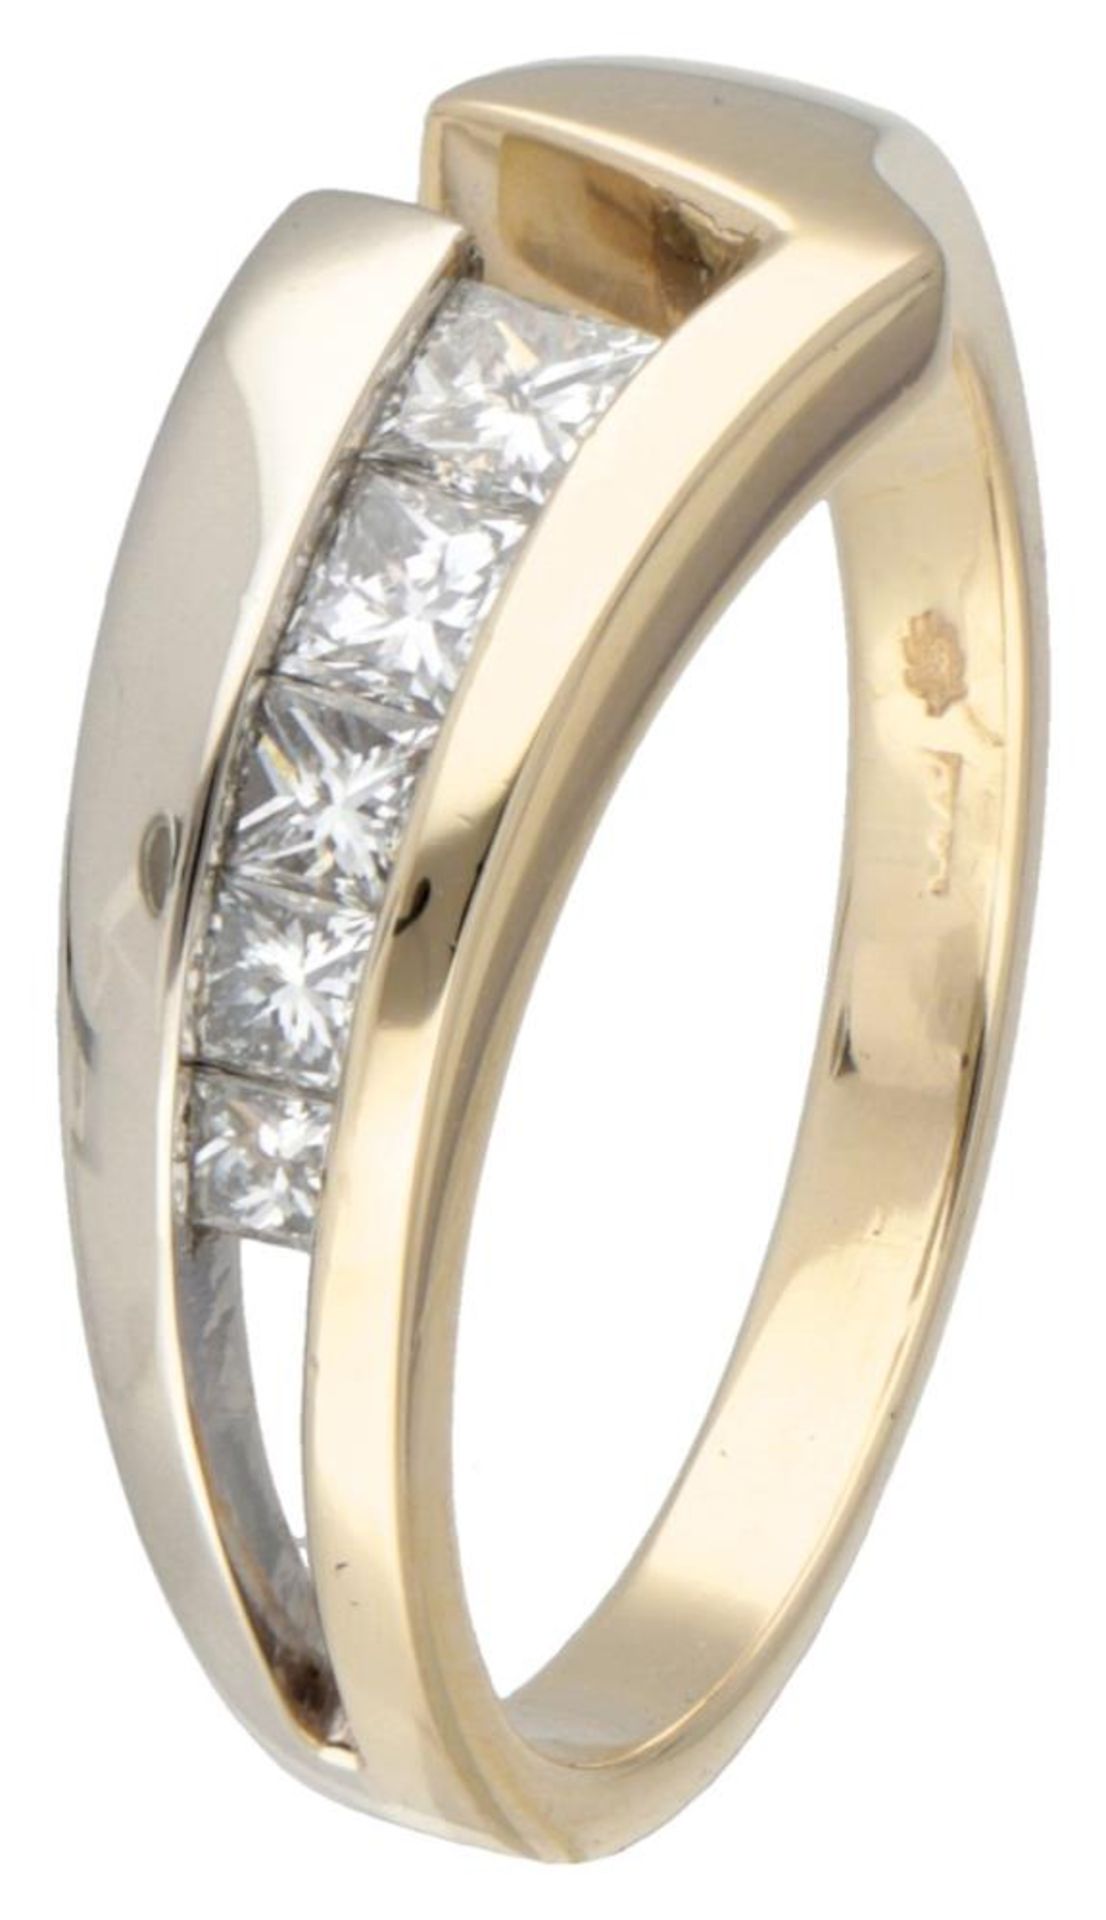 14K. Bicolor gold ring set with approx. 0.41 ct. diamond. - Image 2 of 4